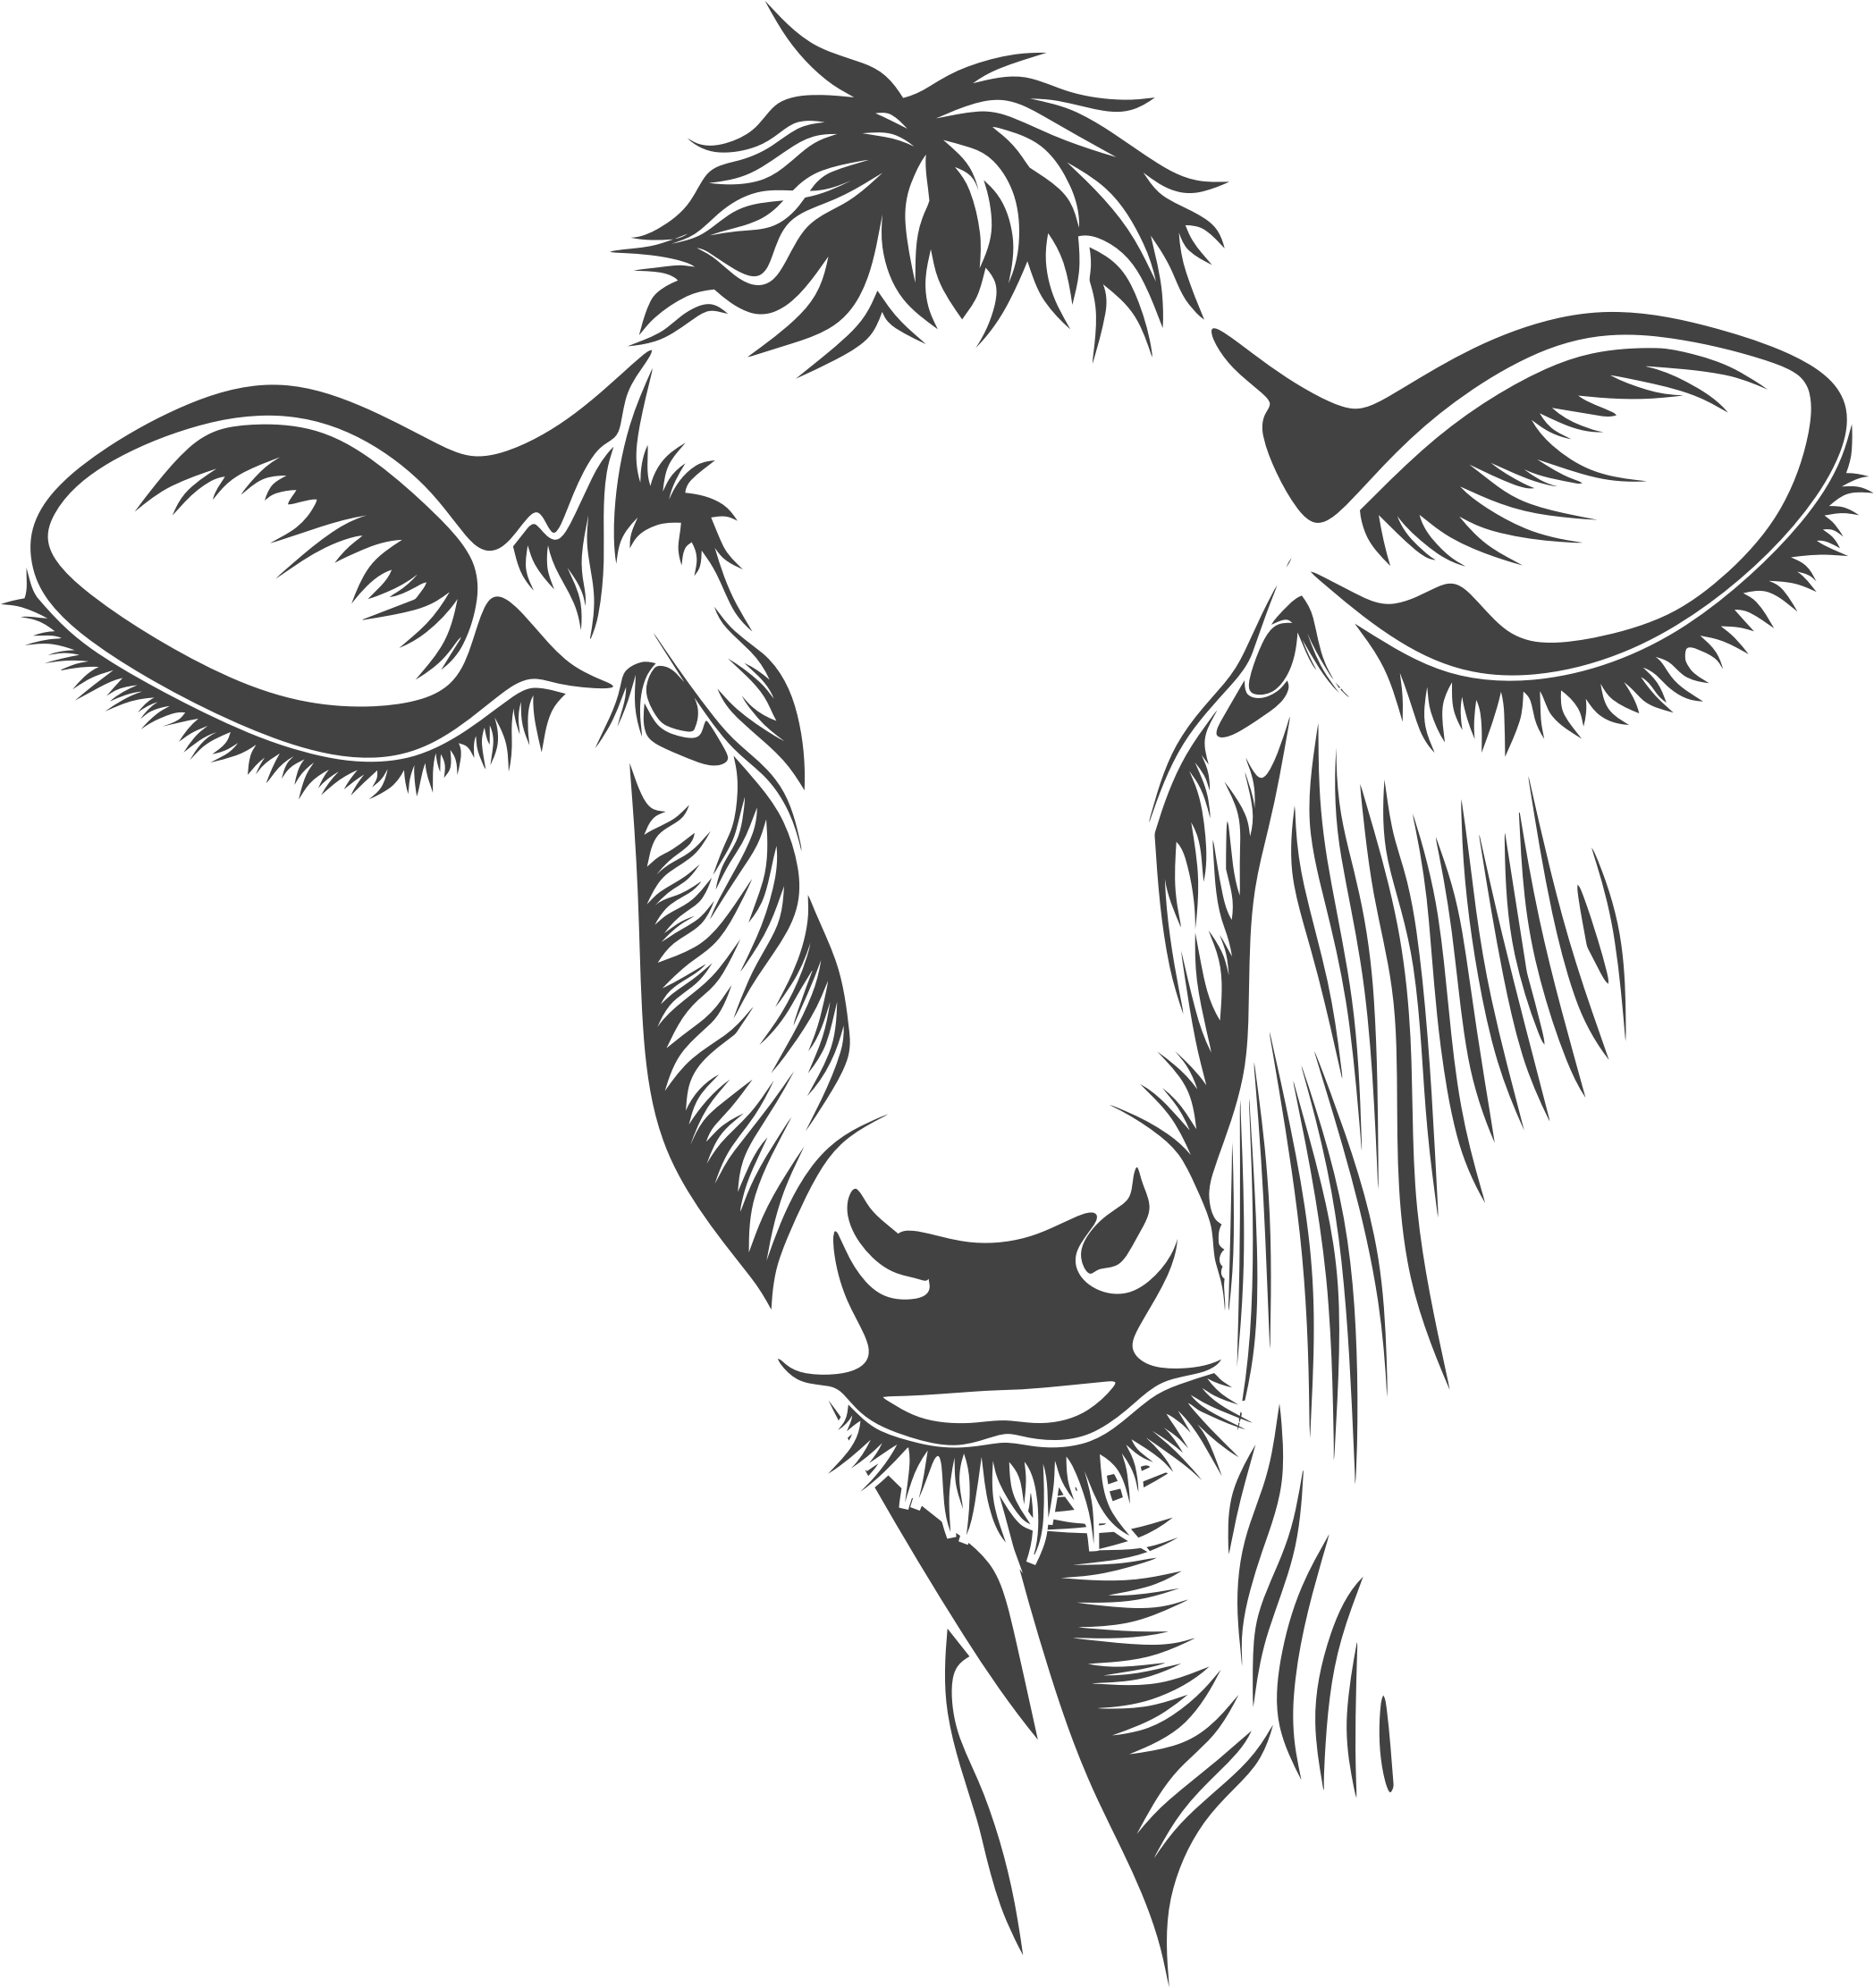 New 2018 Images Cow Vector Free Download - Hangin With My Heifers.